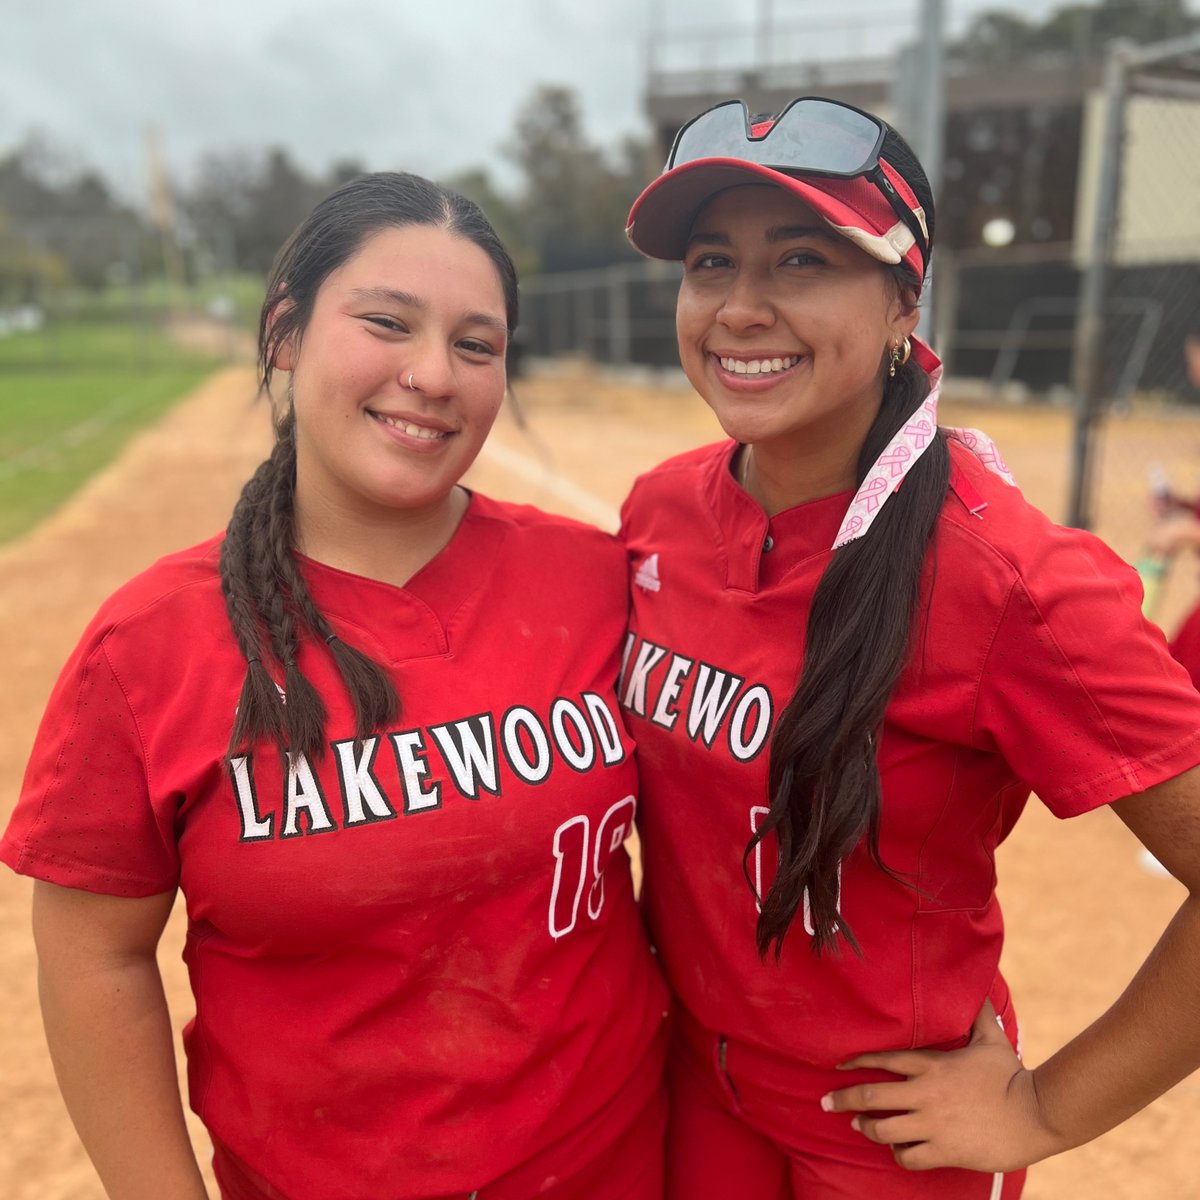 Lakewood pitcher Star Tapia (7 IP, 7 H, 4 K) and senior Madylyn Wynia (2B, 3 RBI) led the Lancers to an impressive 6-3 win over Long Beach Poly today.